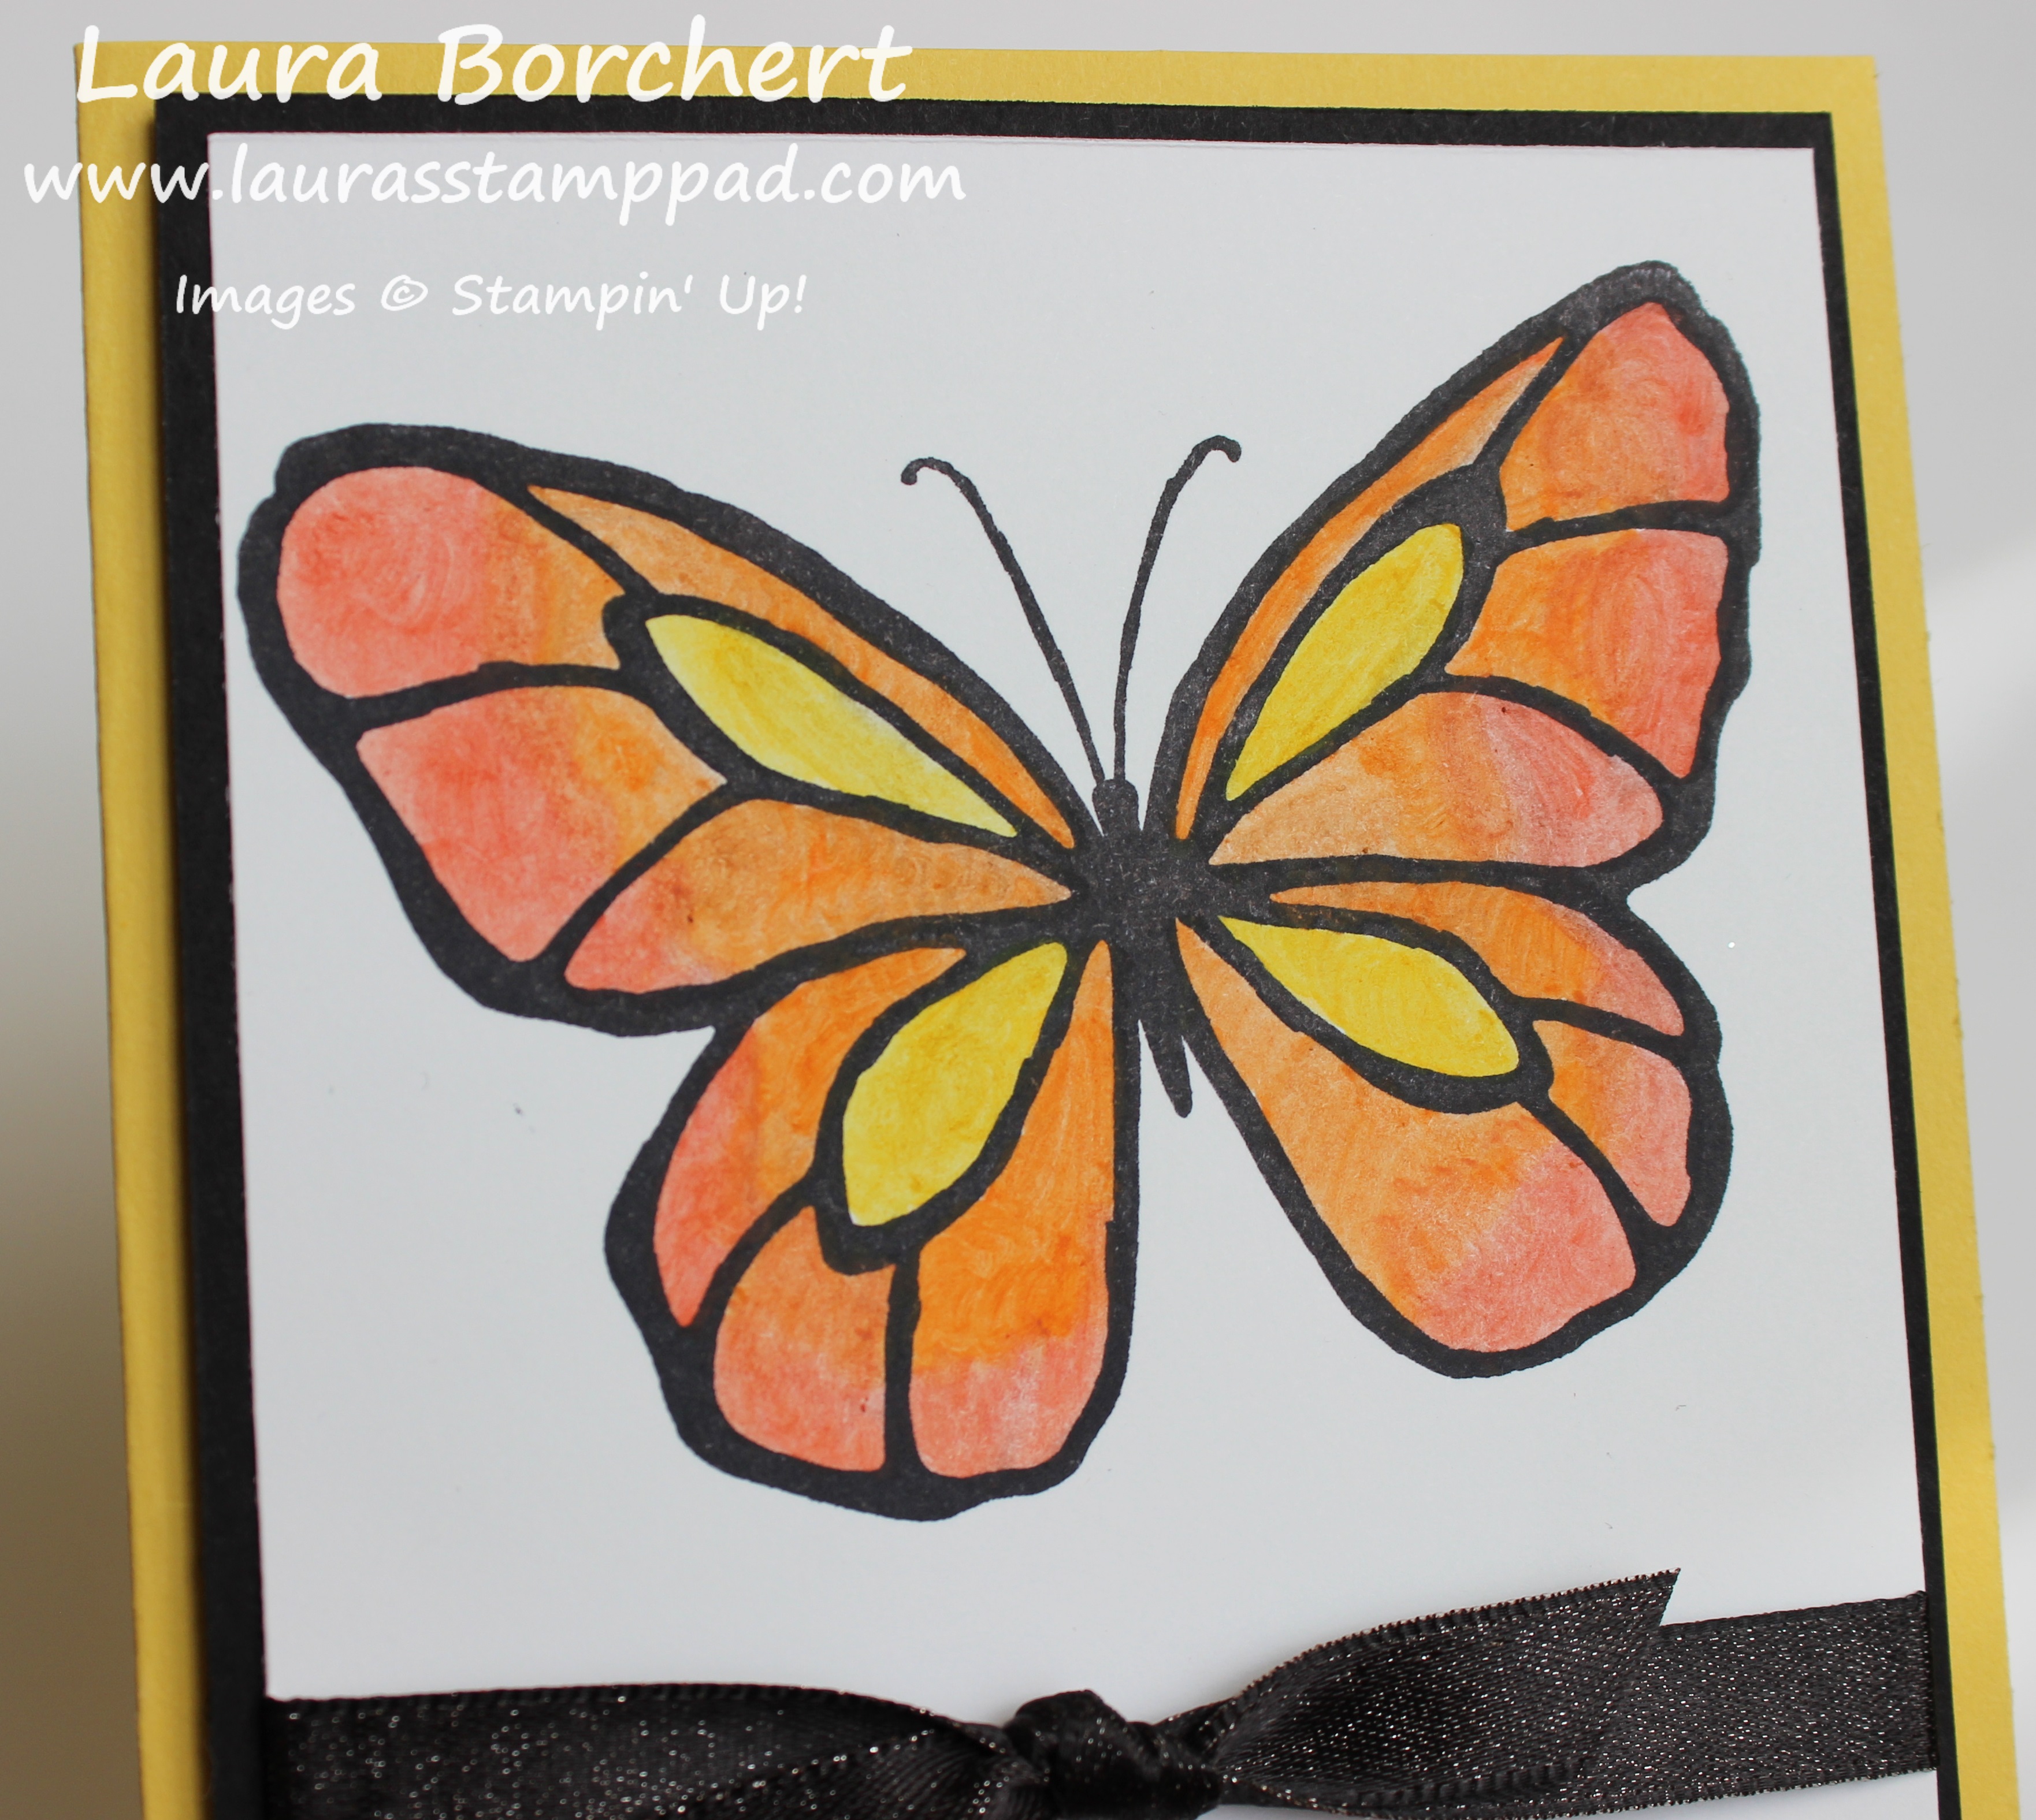 I am blending butterflies today and they look so real!!!Laura's Stamp Pad